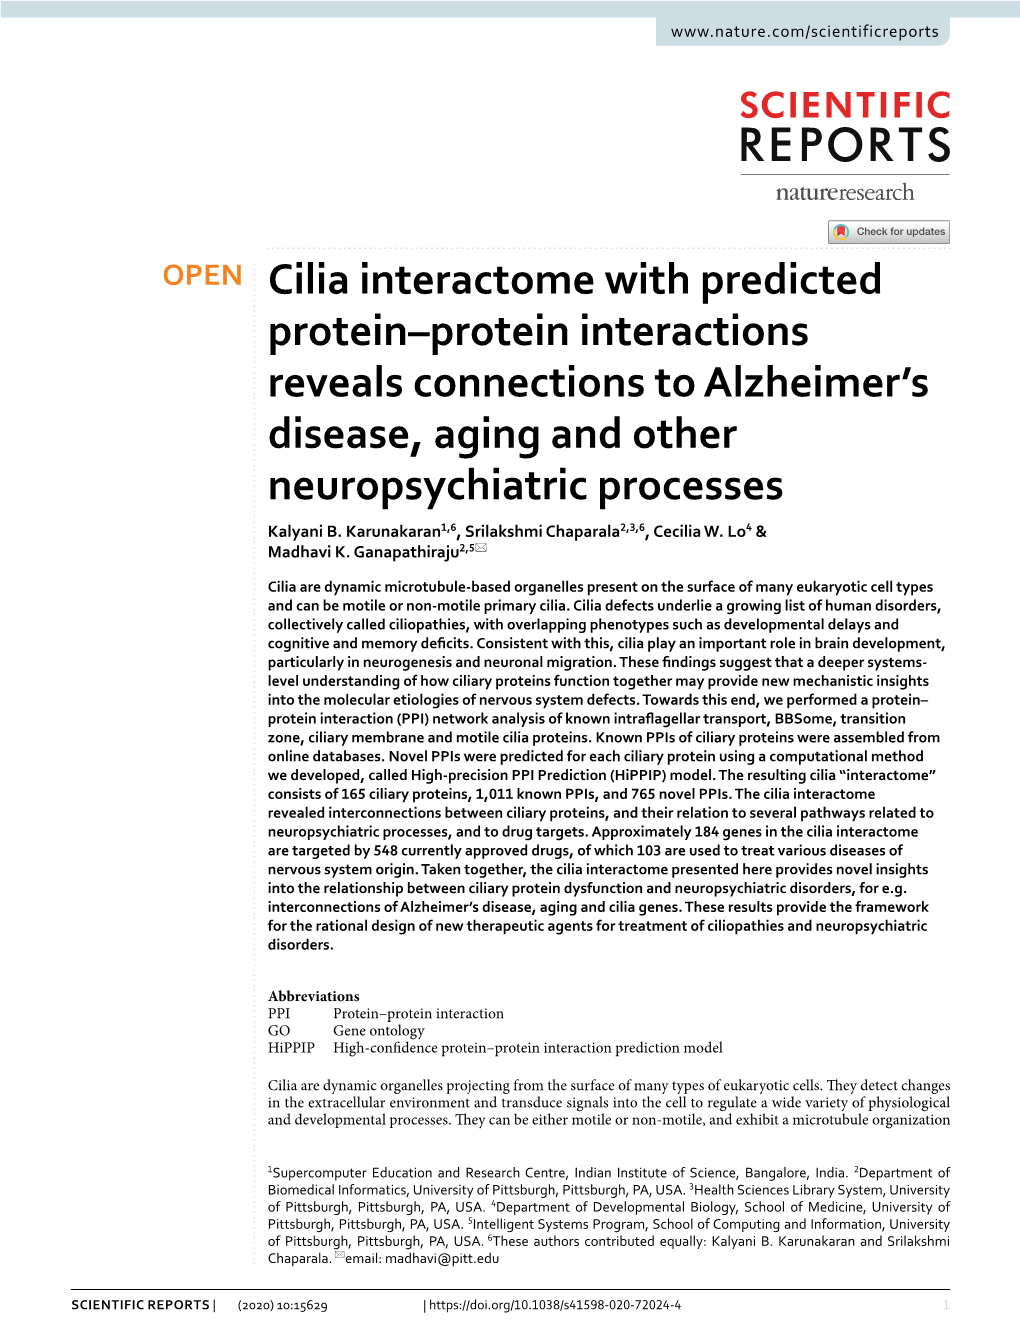 Cilia Interactome with Predicted Protein–Protein Interactions Reveals Connections to Alzheimer’S Disease, Aging and Other Neuropsychiatric Processes Kalyani B